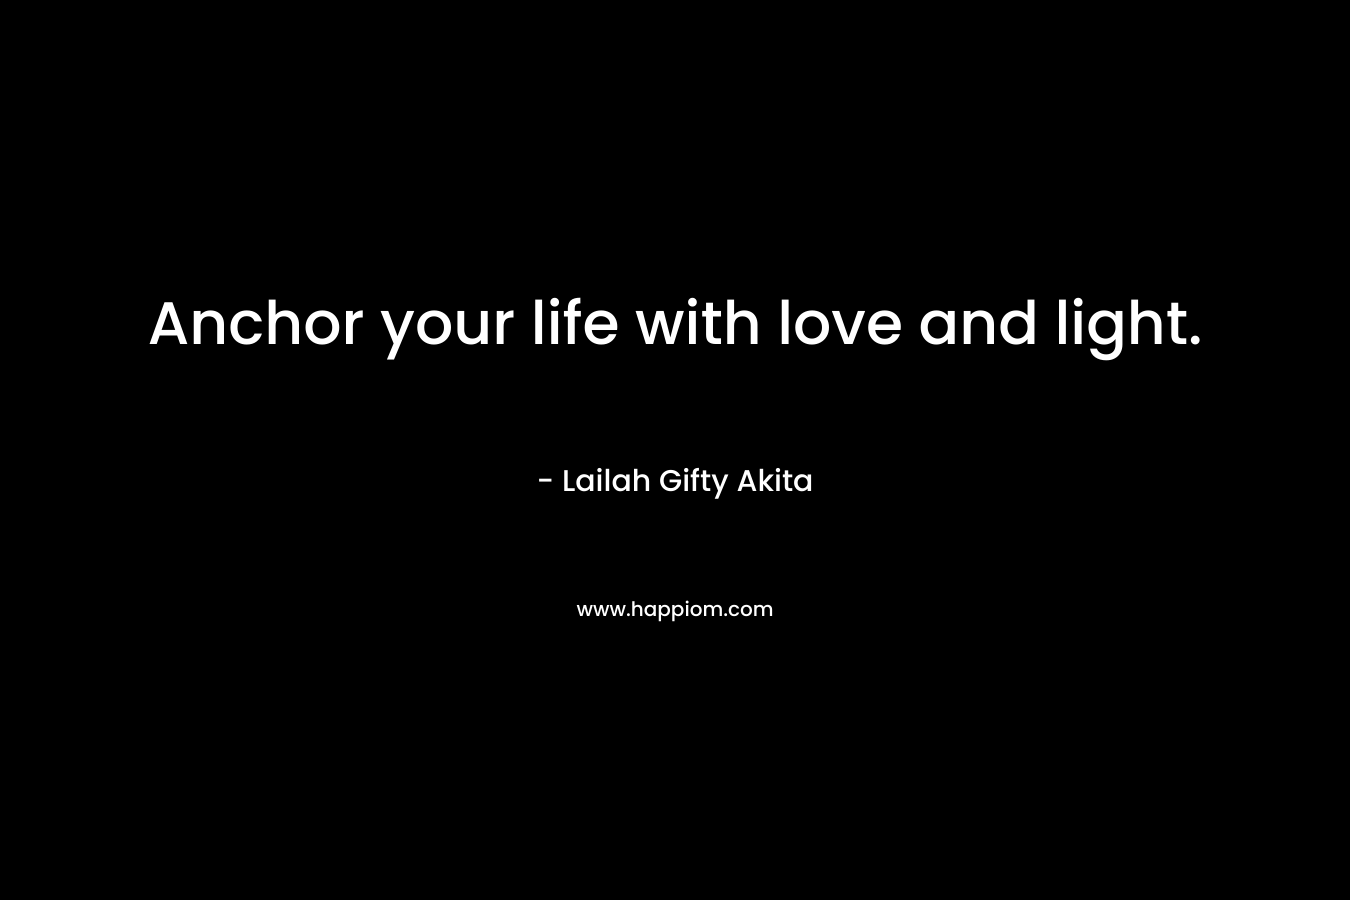 Anchor your life with love and light.